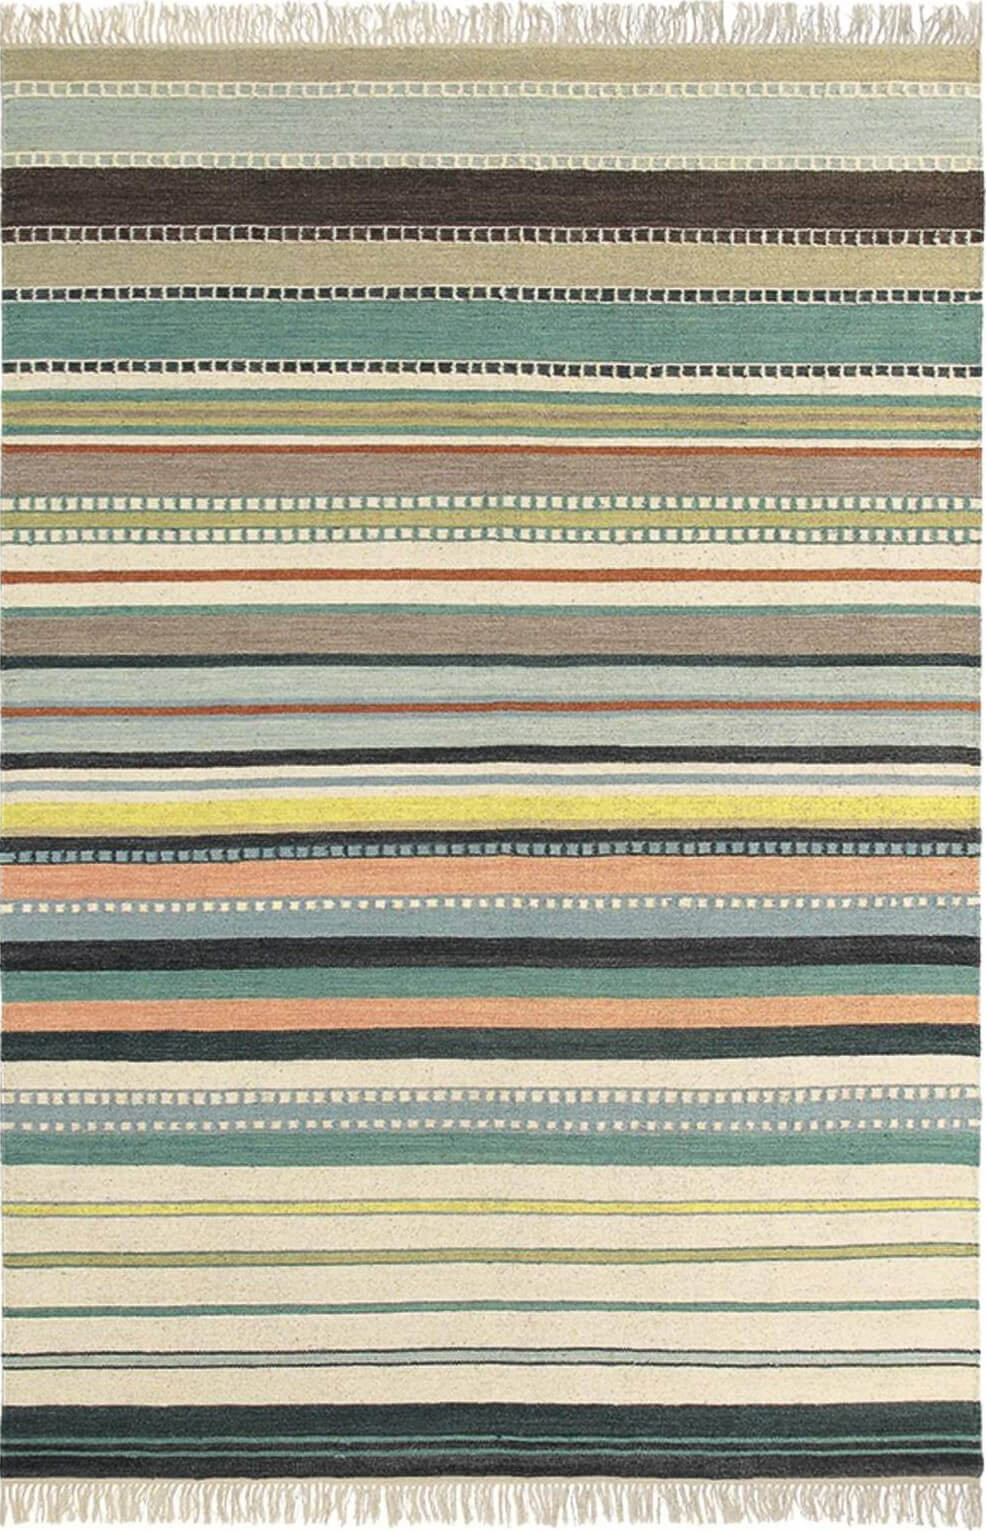 Gorgeous Hand-Woven Rug ☞ Size: 160 x 230 cm